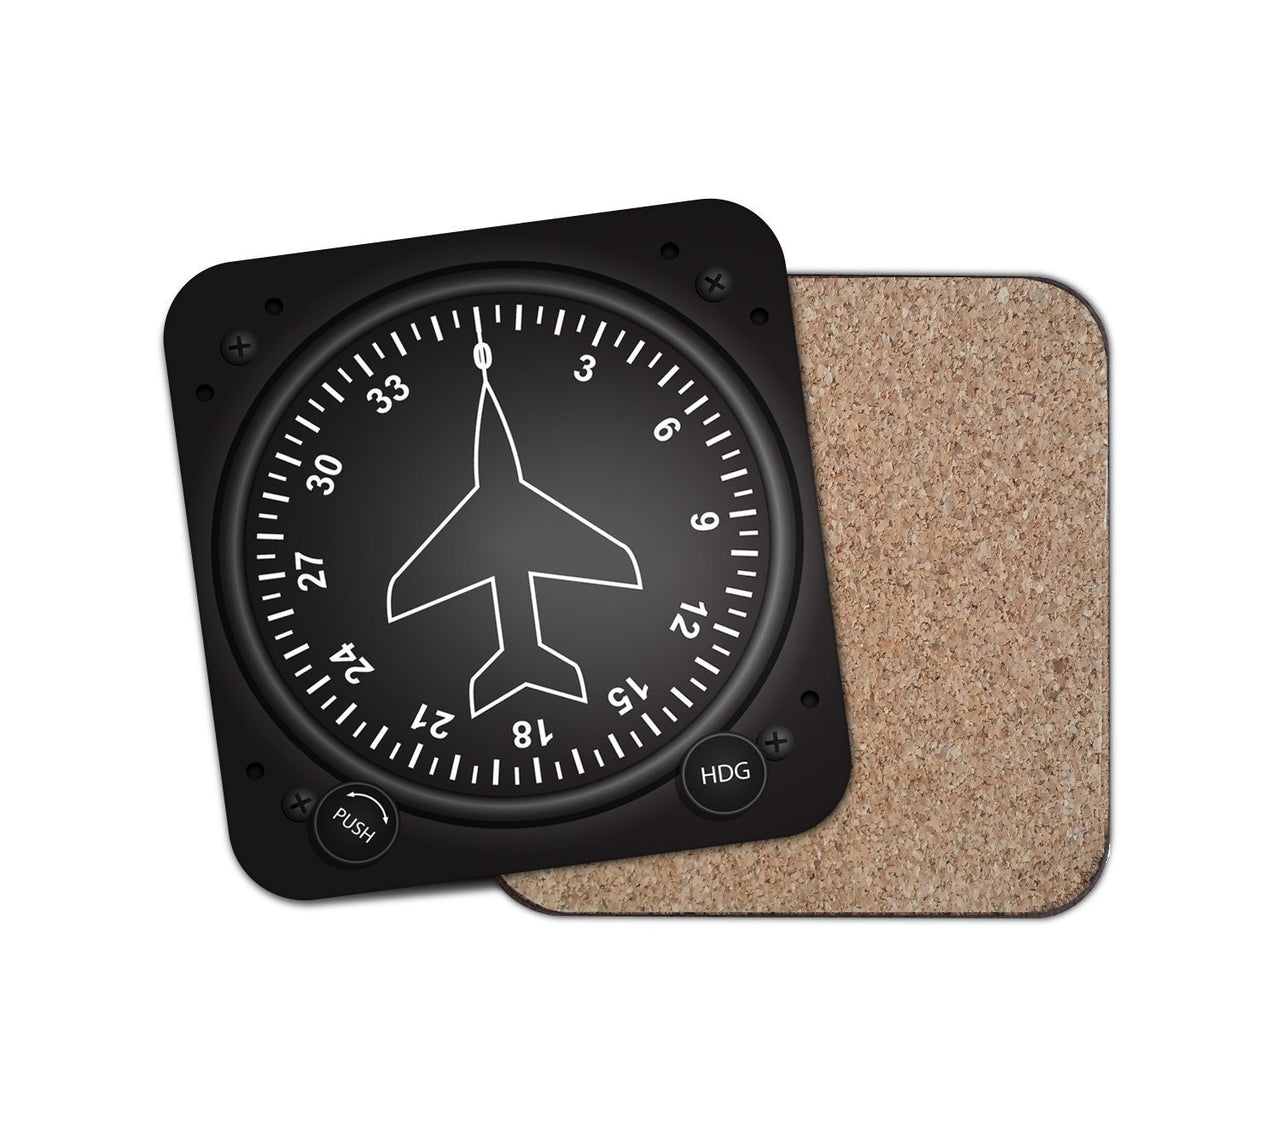 SPECIAL OFFER! Airplane Instrument Series (6 Pieces) Coasters Pilot Eyes Store 